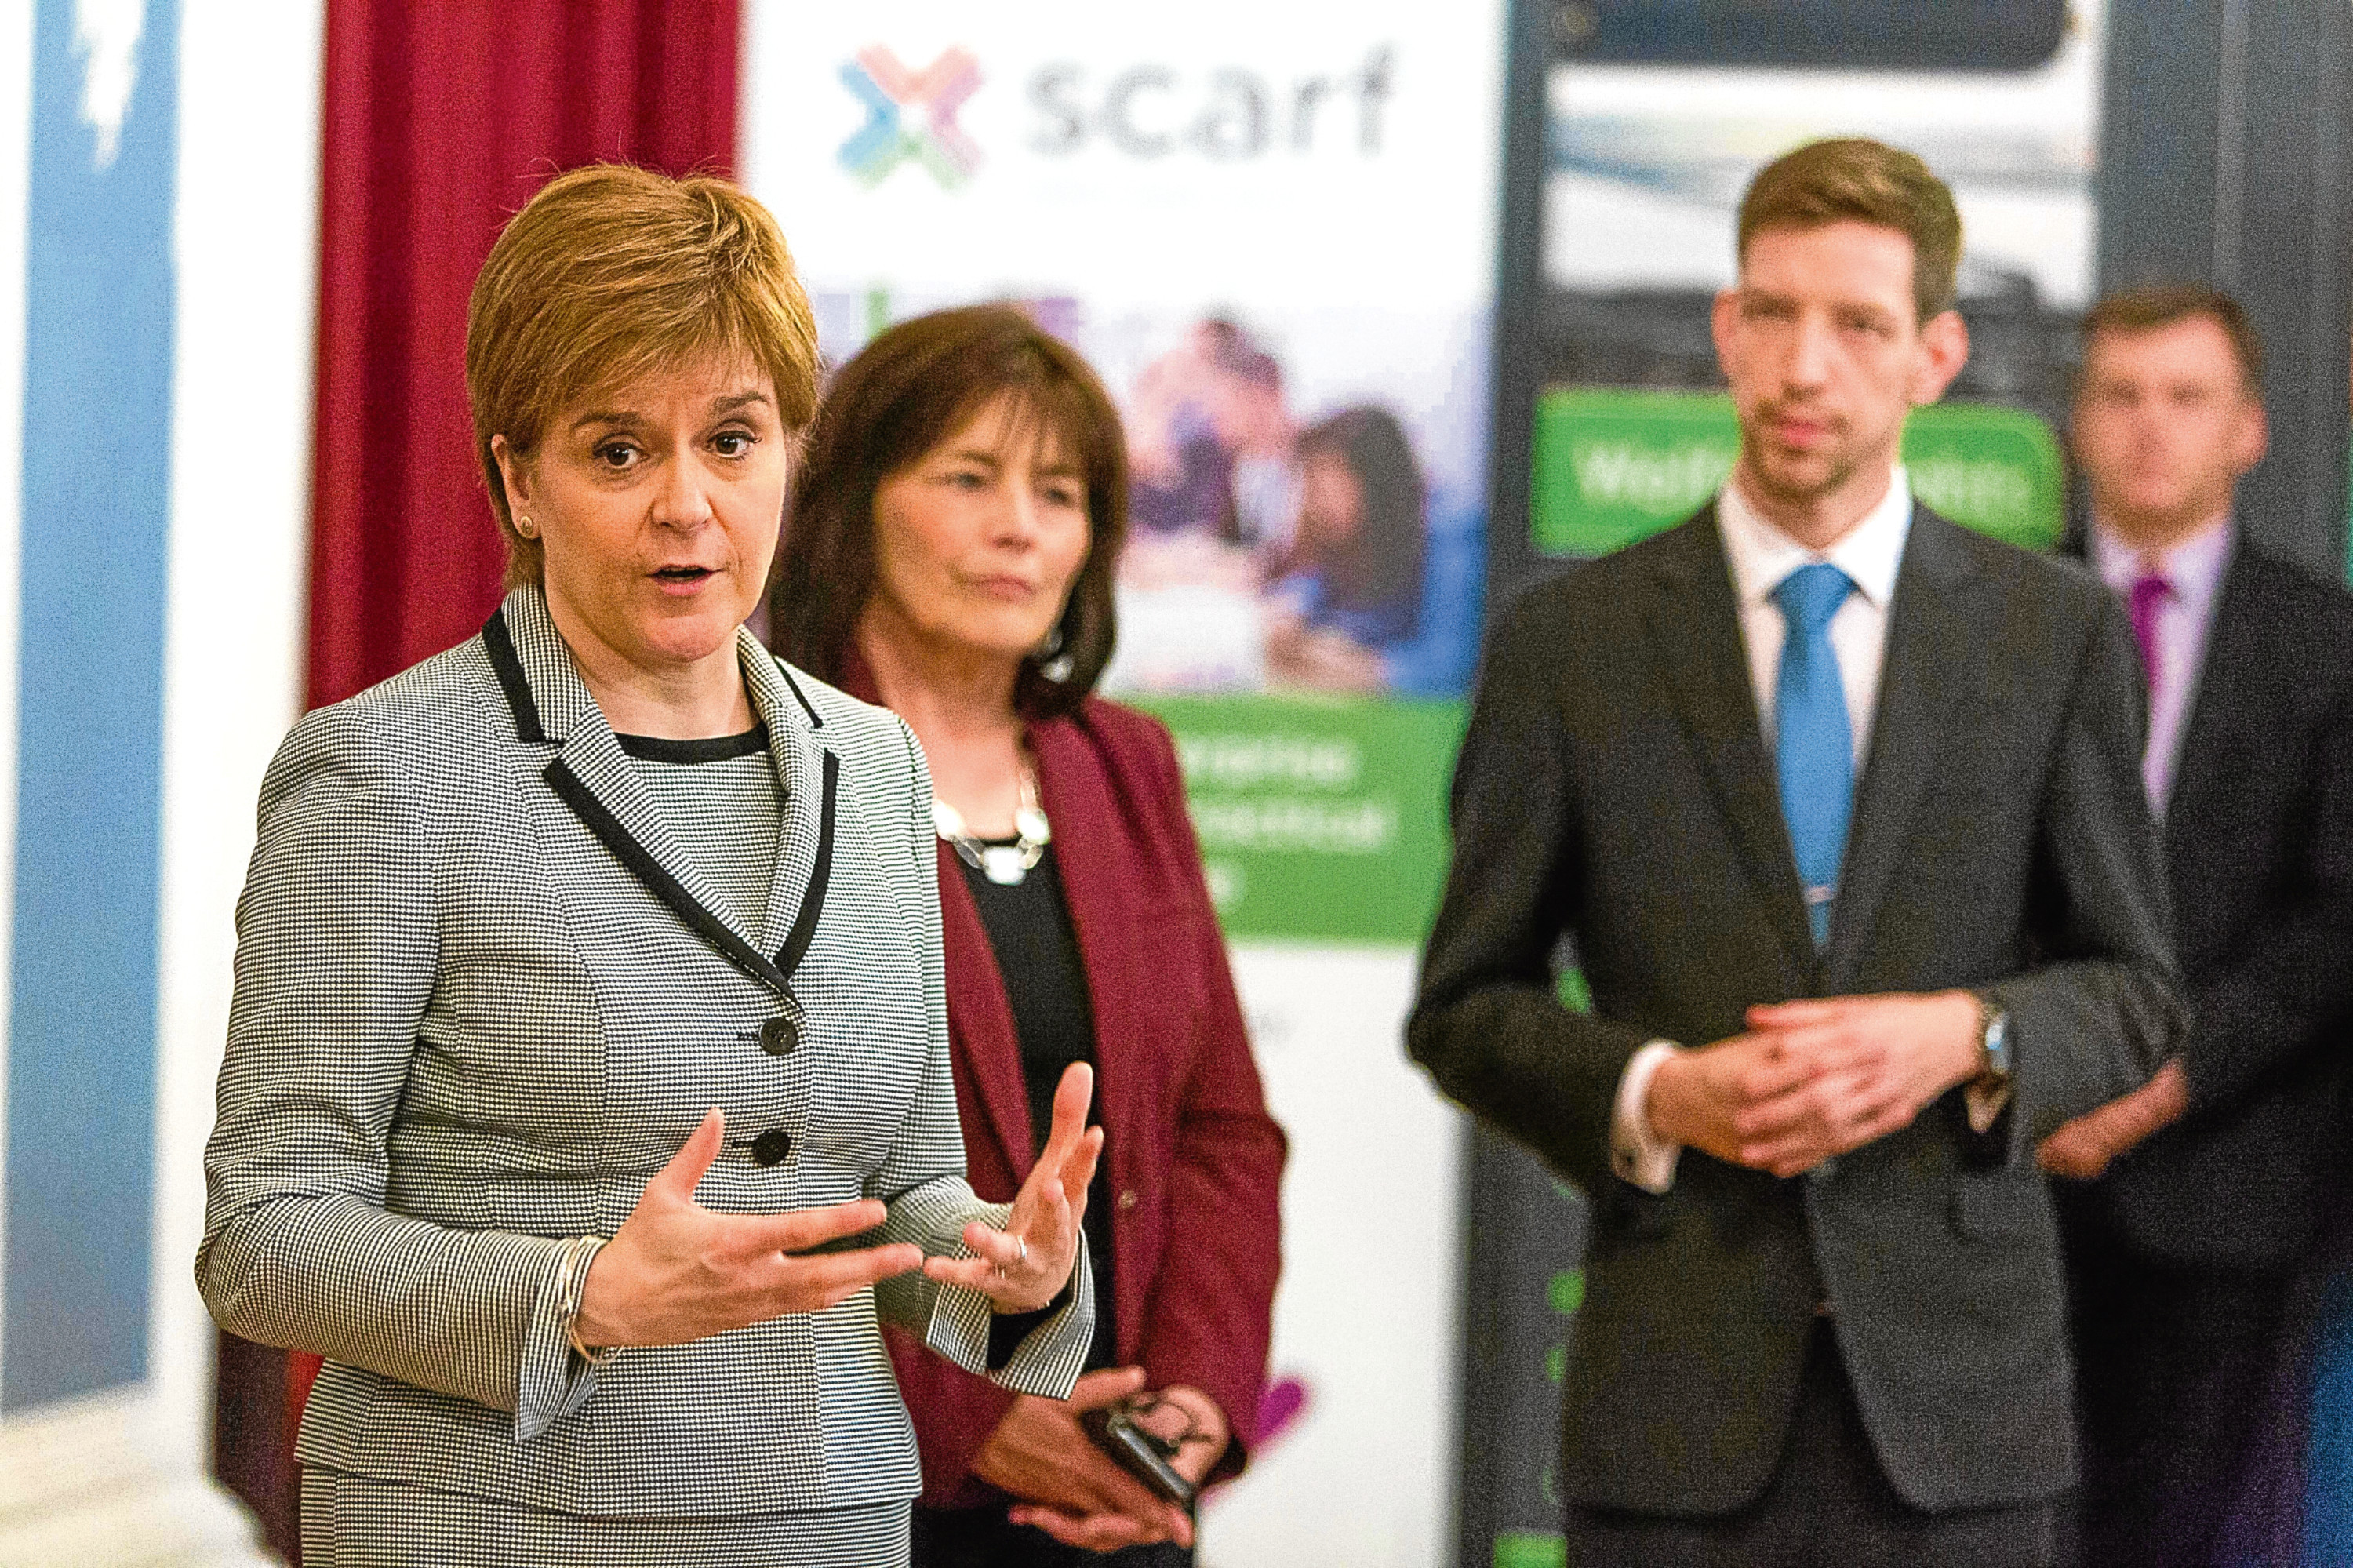 Nicola Sturgeon in Dundee with social security minister Jeane Freeman and council leader John Alexander